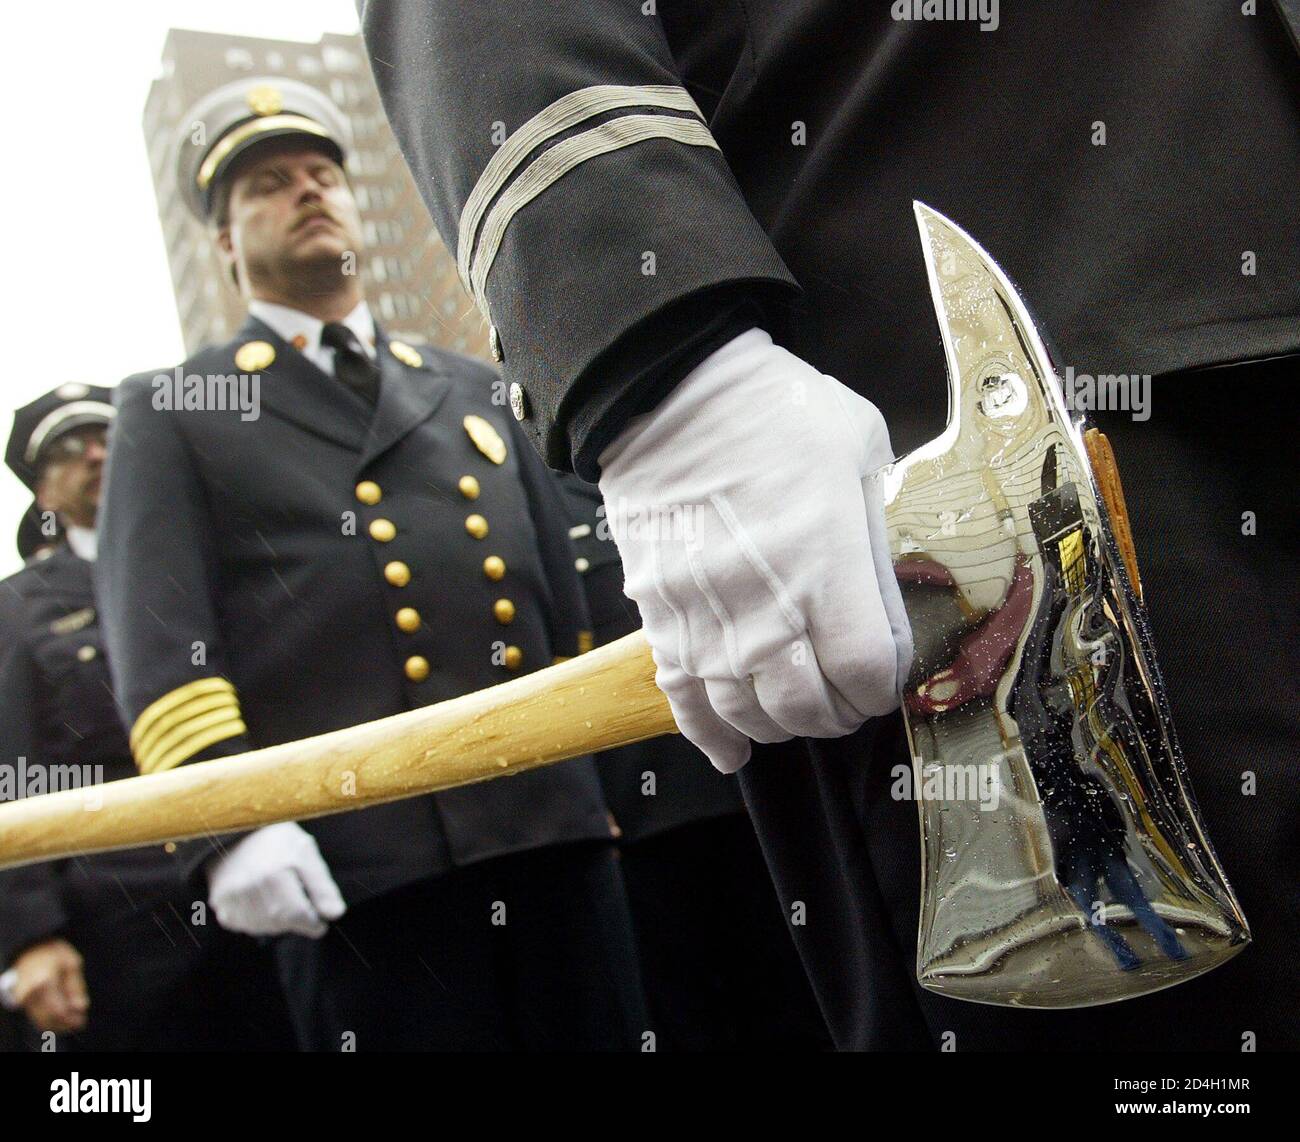 A firefighter carries an axe during the FDNY Memorial Day event in New York, October 12, 2002. Firefighters from across the world filled Madison Square Garden and the surrounding blocks on Saturday to honor the 343 firefighters who died in the World Trade Center hijack attack last year. [Because last year's event was canceled due to the attack on the trade center, this year, an honor guard carried 356 flags, to also honor those firefighters who died in the line of duty in New York since mid-October 2000.] Stock Photo